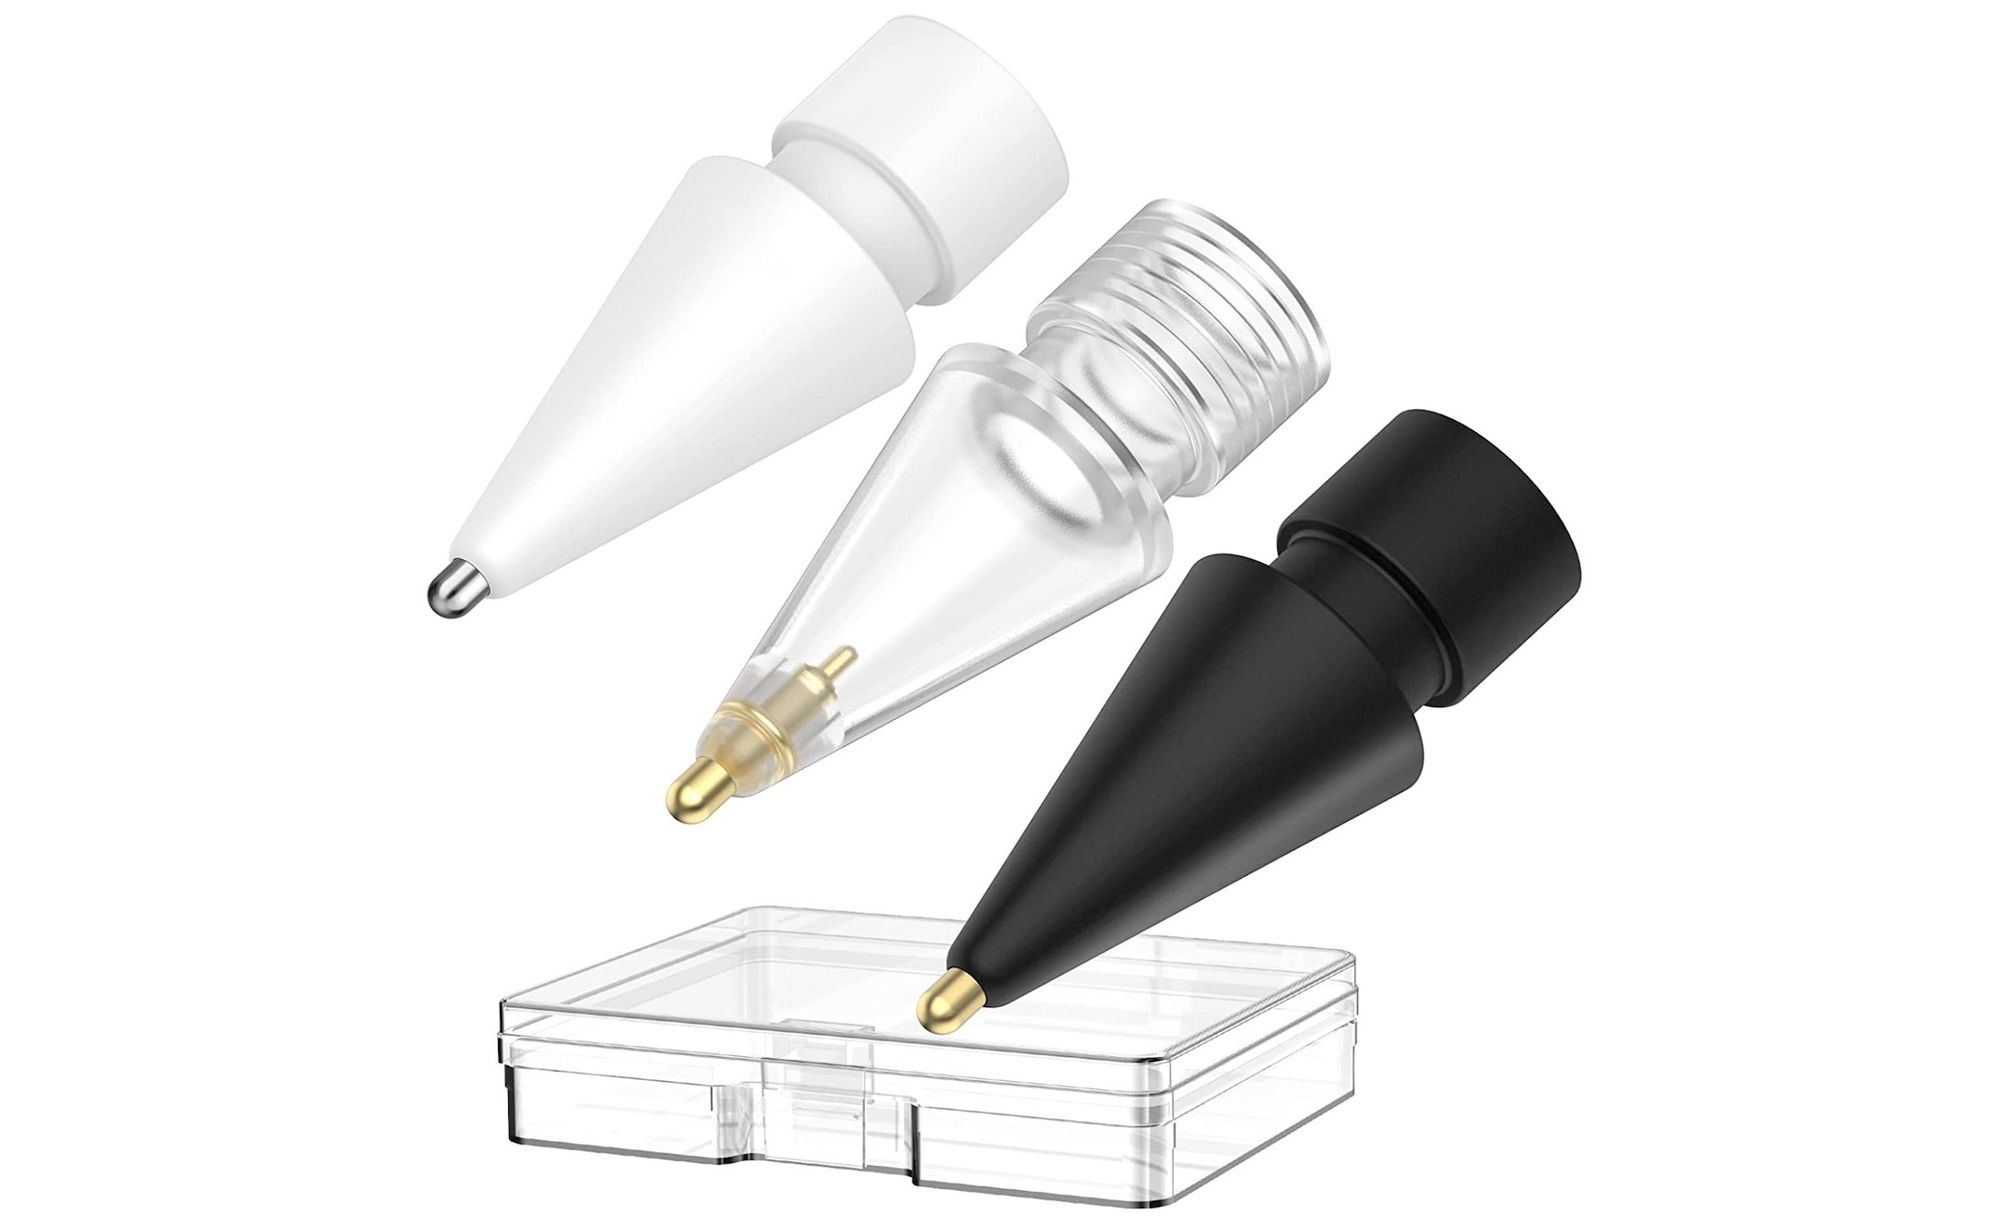 5. Delidigi replacement tips compatible with Apple Pencil 2nd (Gen) and 1st (Gen)